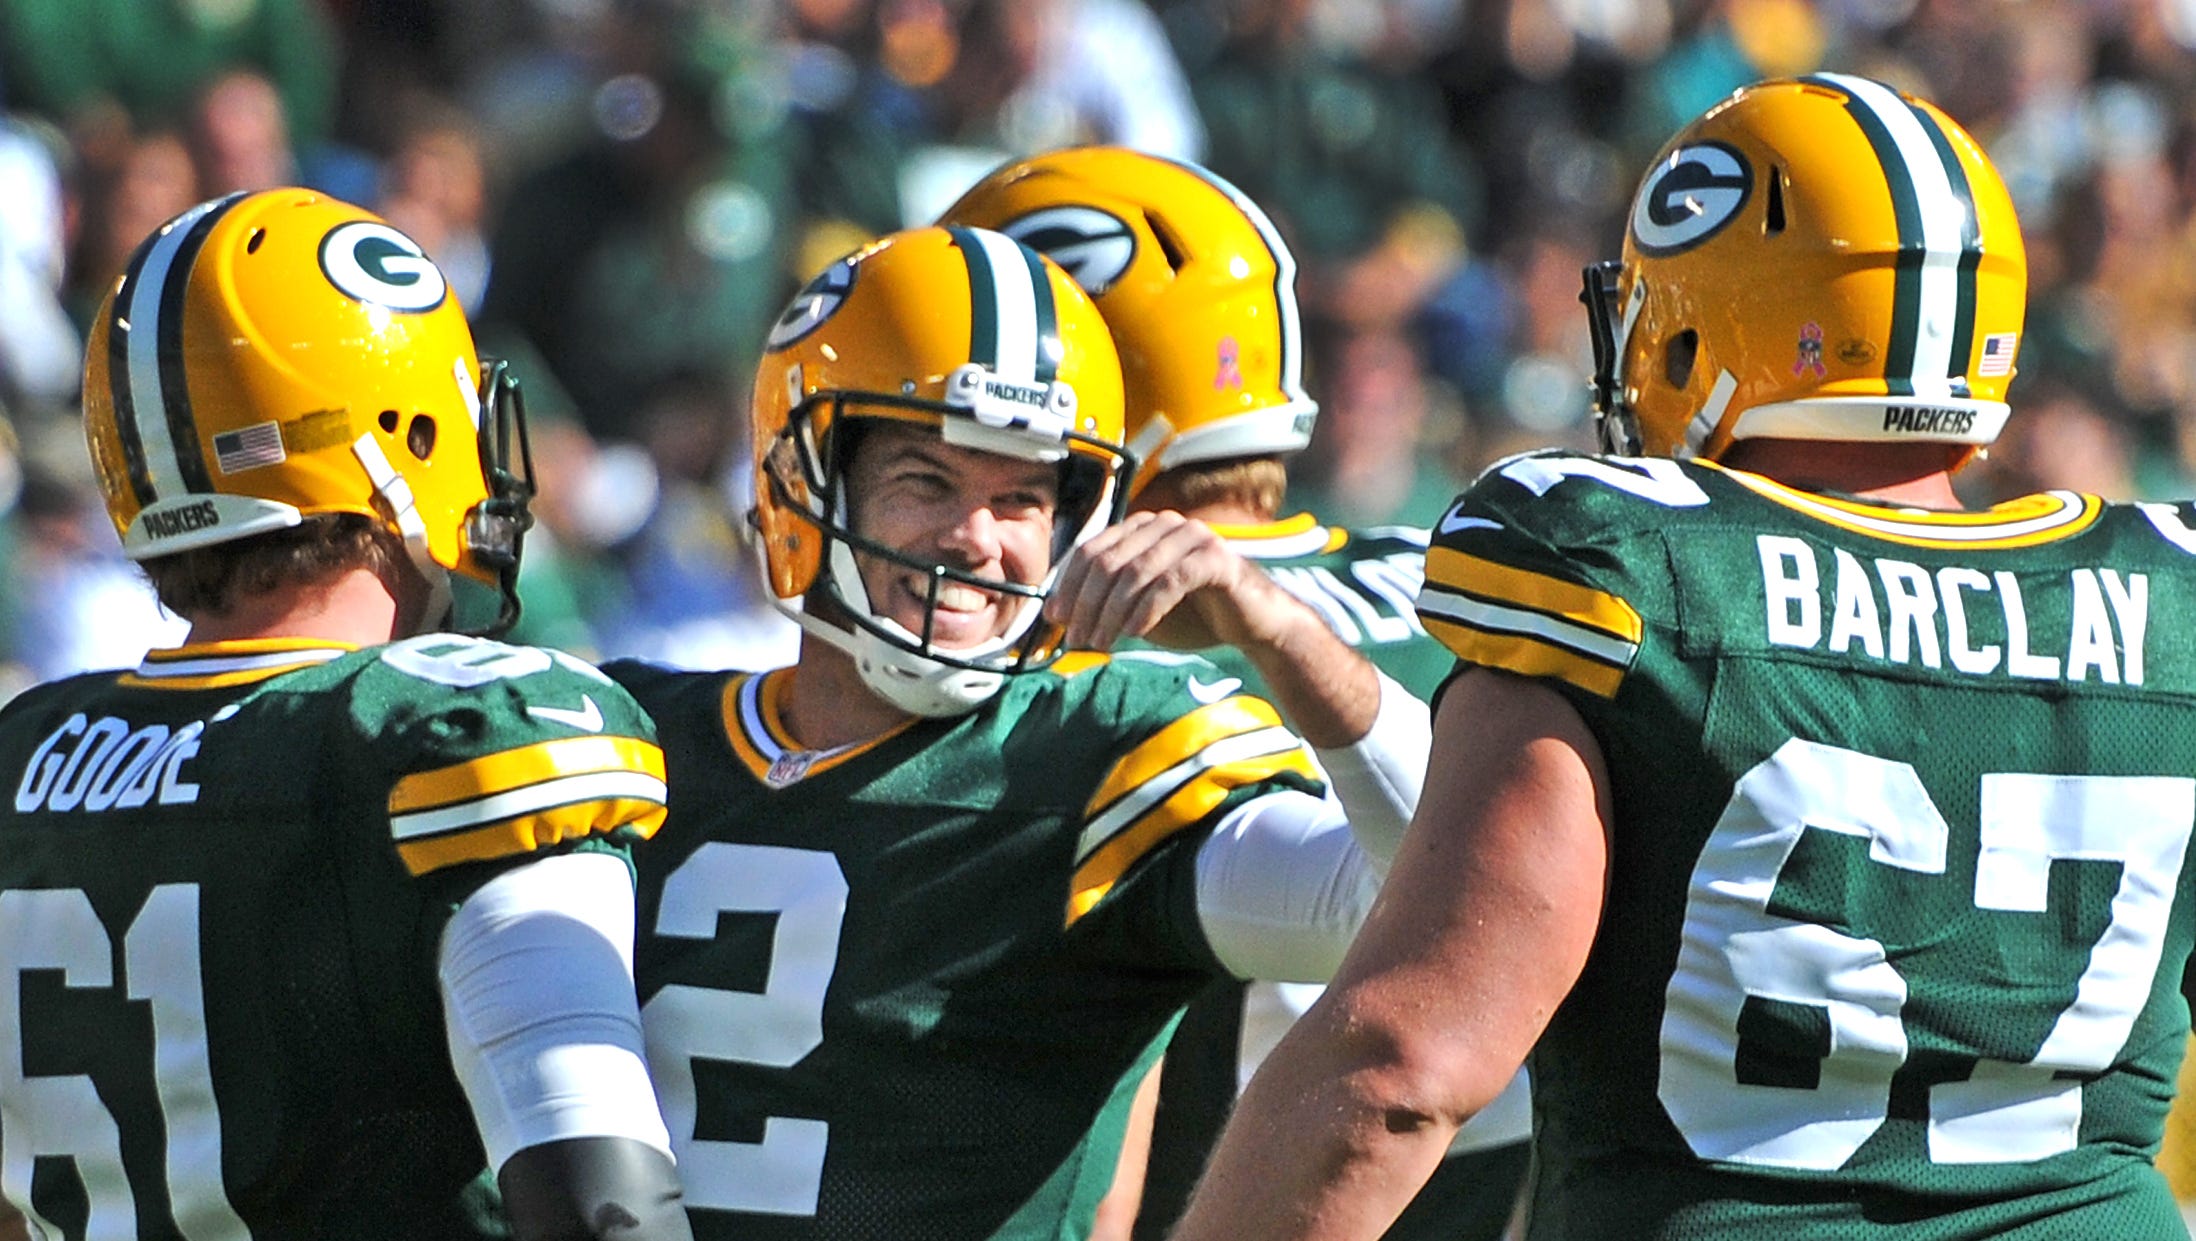 Green Bay Packers kicker Mason Crosby reacts after making one of his two fourth-quarter field goals against the Detroit Lions on Oct. 6, 2013, at Lambeau Field. He finished 5-for-5 on the day.